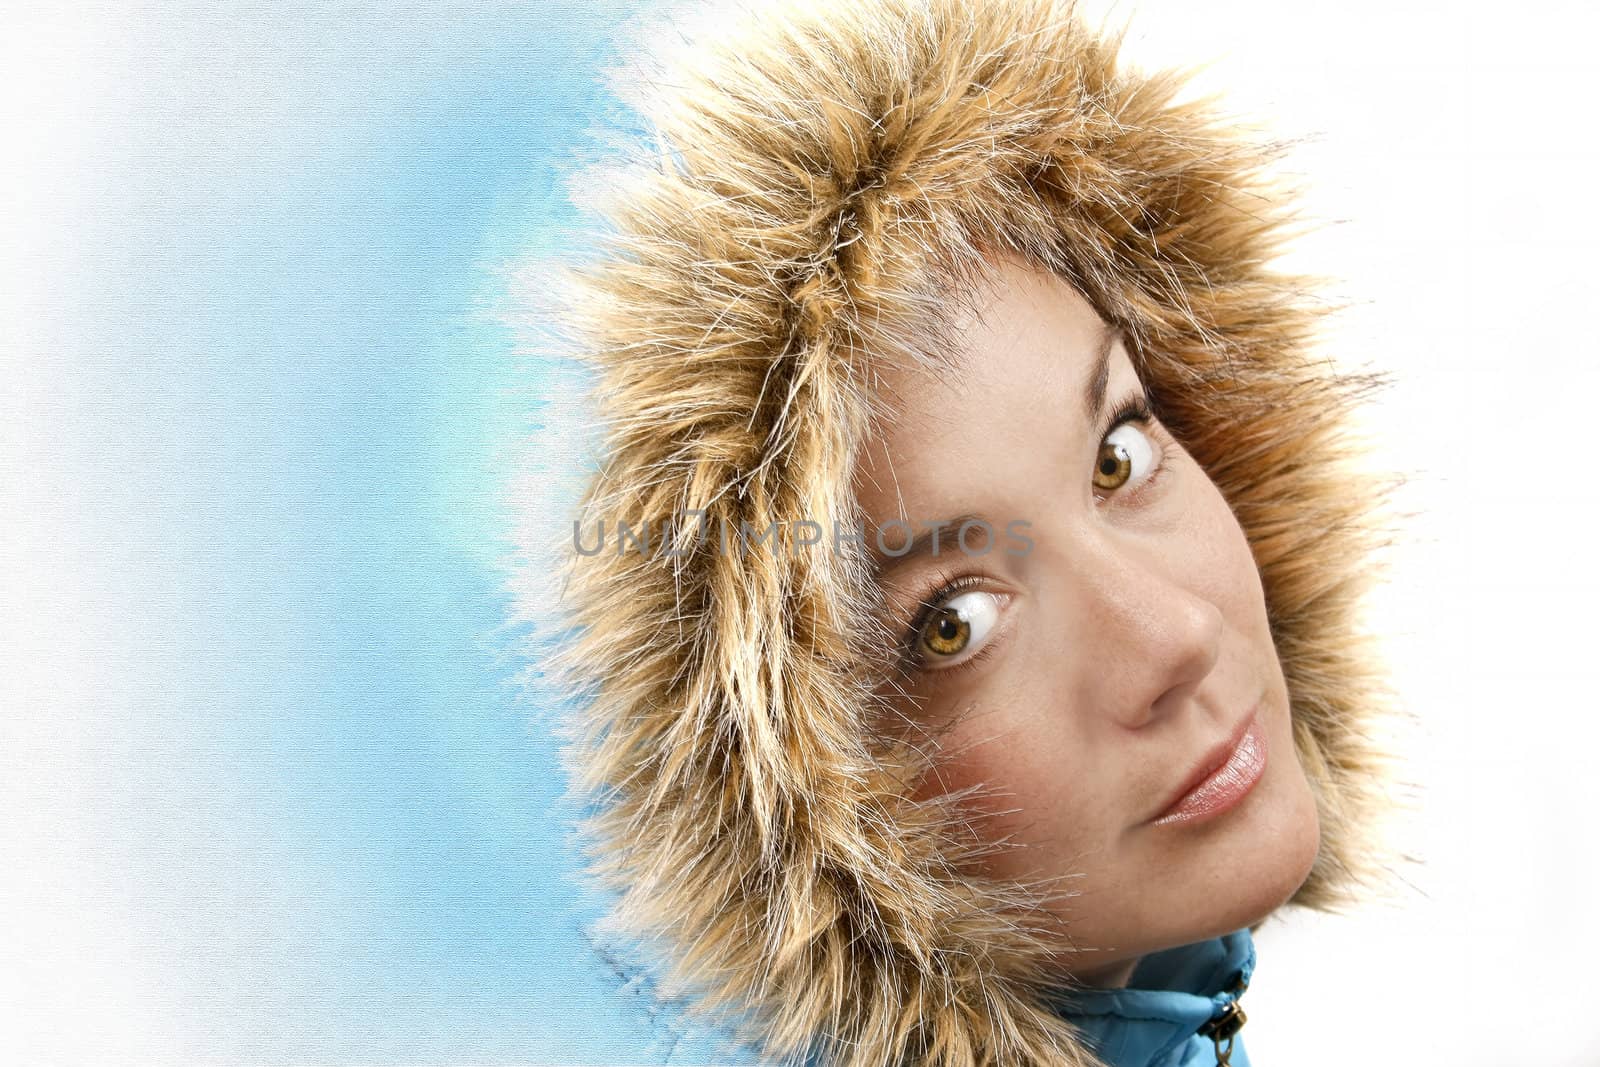 Middle aged young woman in a blue furry hood looking pleasent.